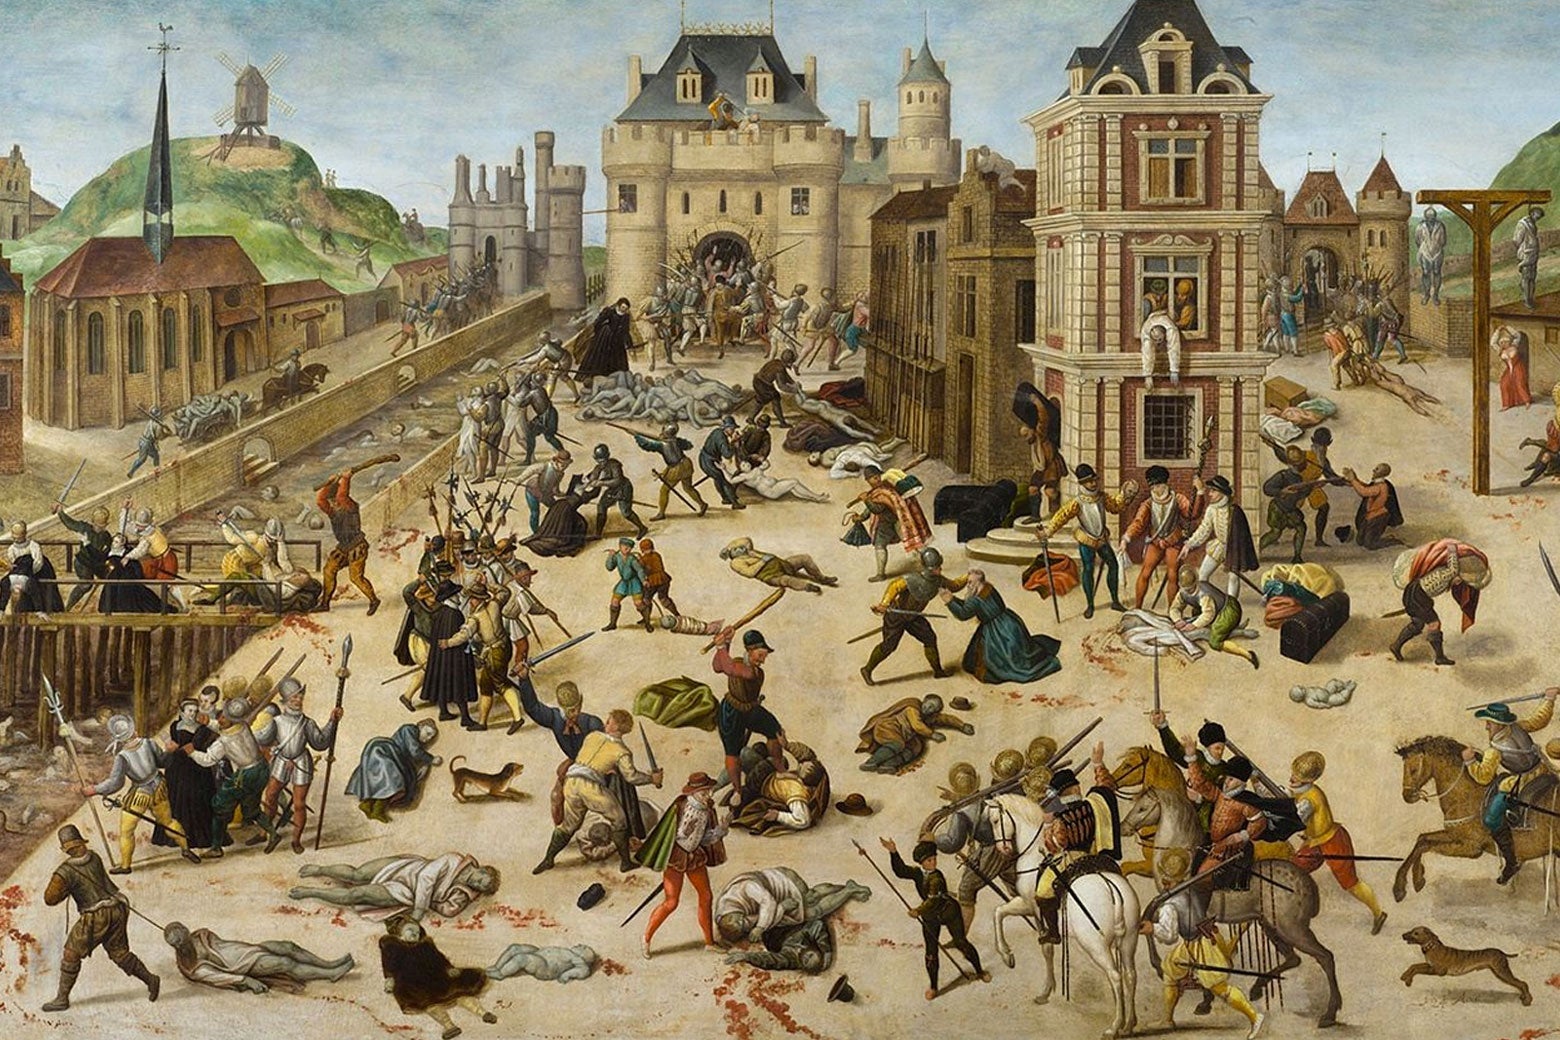 An illustration of murders in the streets on the St. Bartholomew’s Day Massacre.